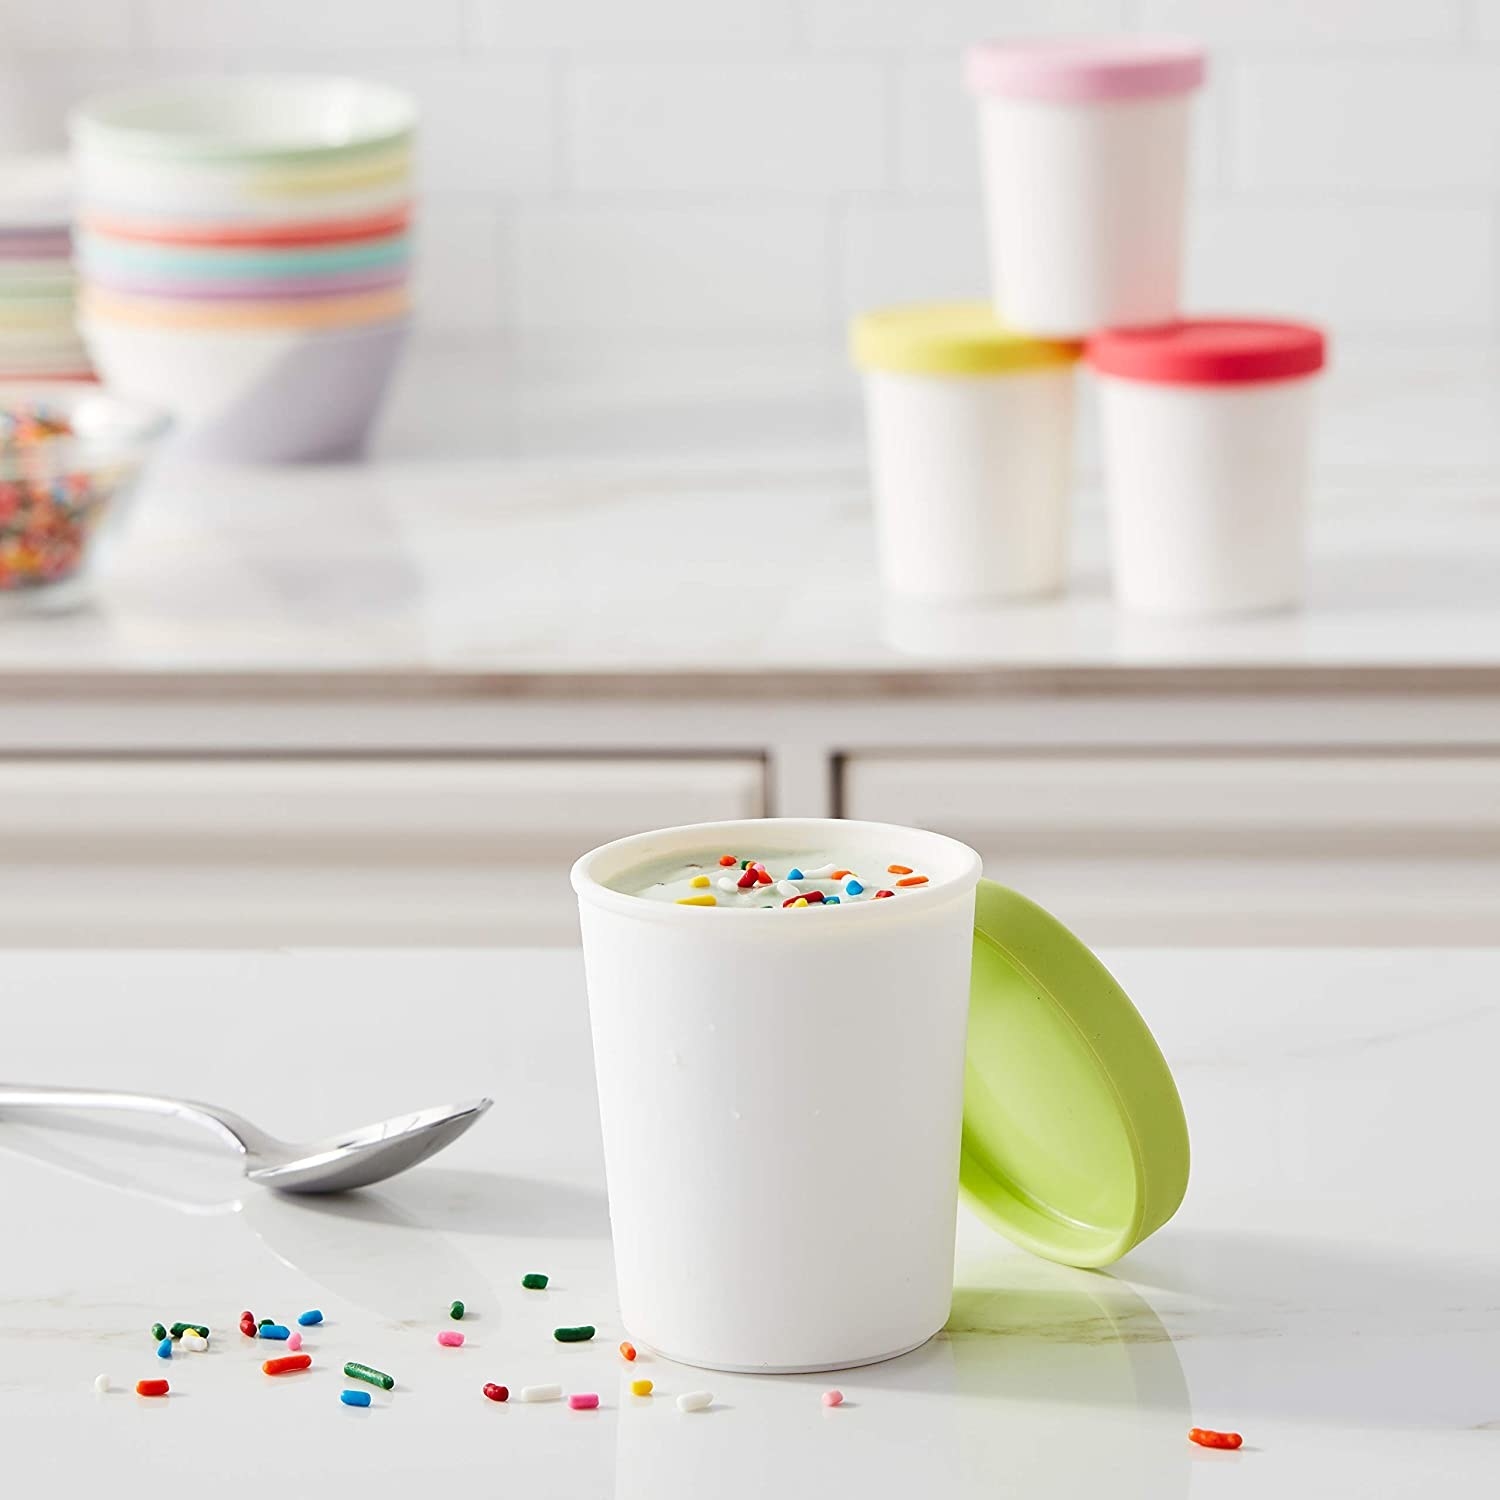 A mini ice cream tub full of vanilla ice cream sits on a countertop with scattered sprinkles around it